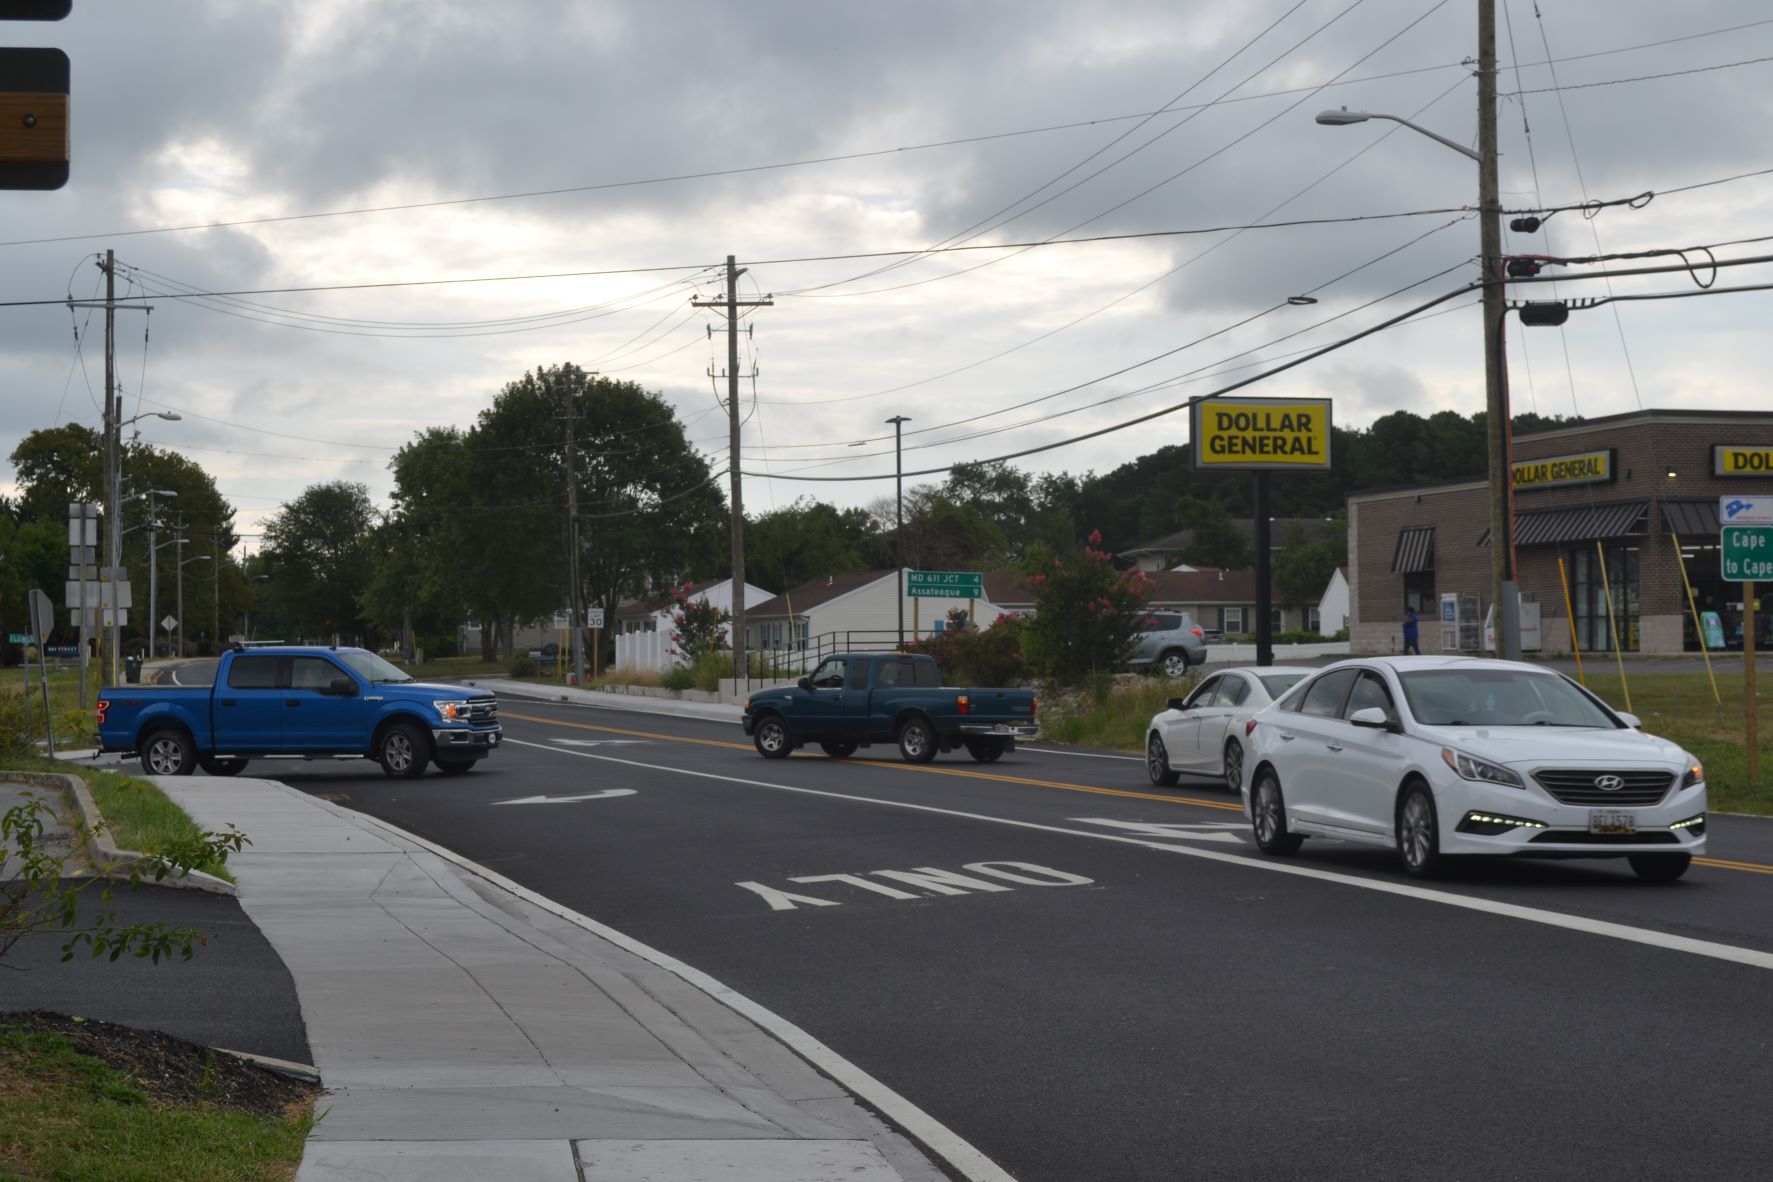 Berlin officials discuss safety issues near intersection